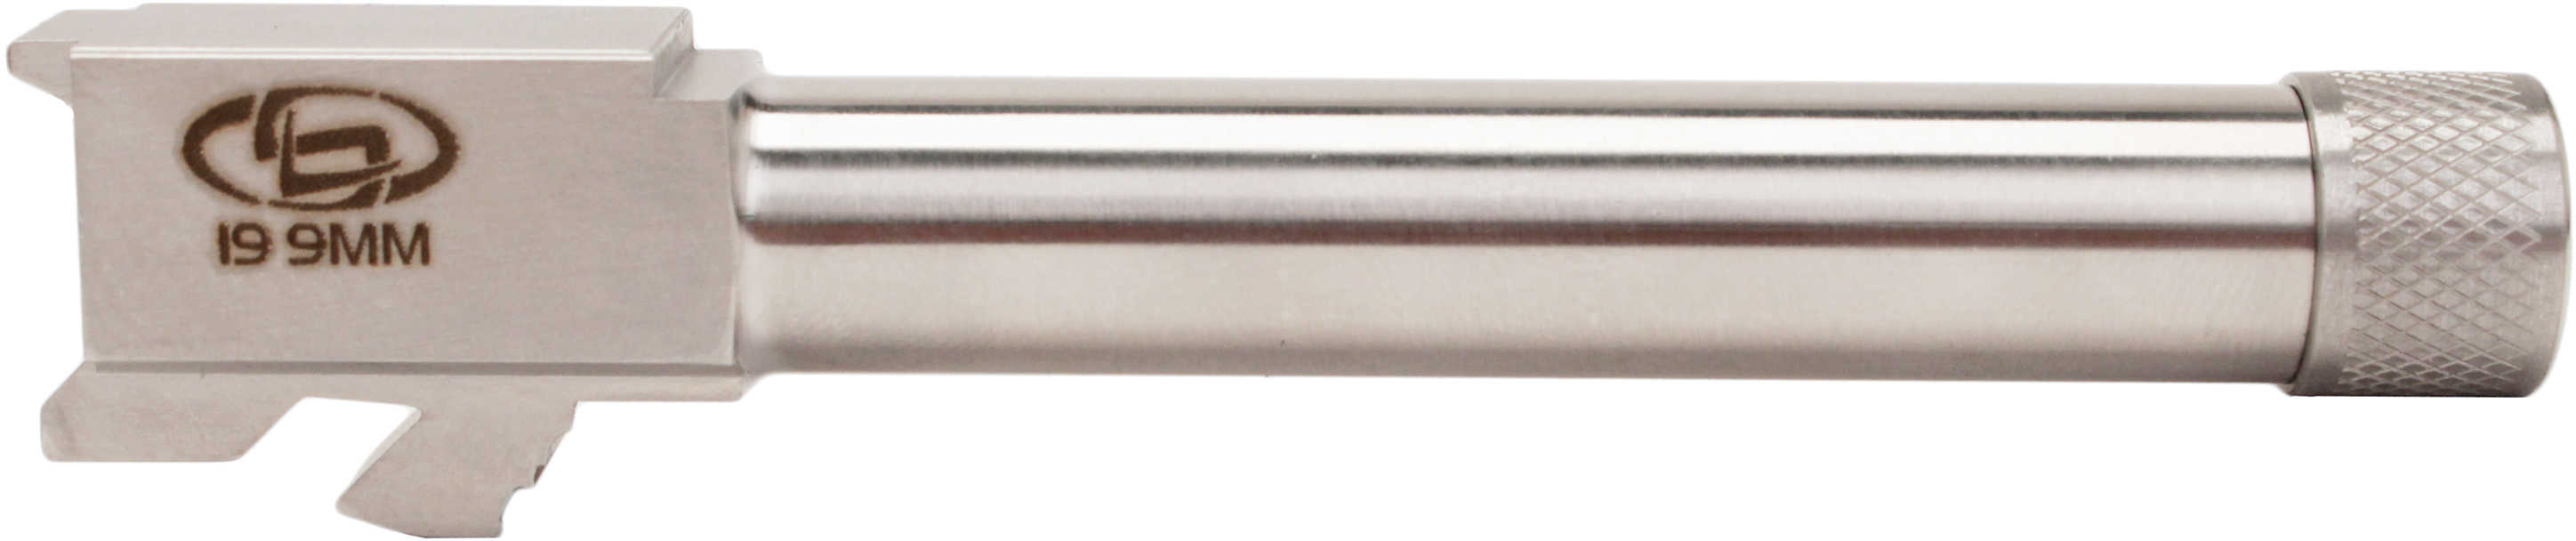 Storm Lake Barrels 9MM 4.72" Fits Glock 19 Stainless Finish 1/2-28 Thread With Protector 3400